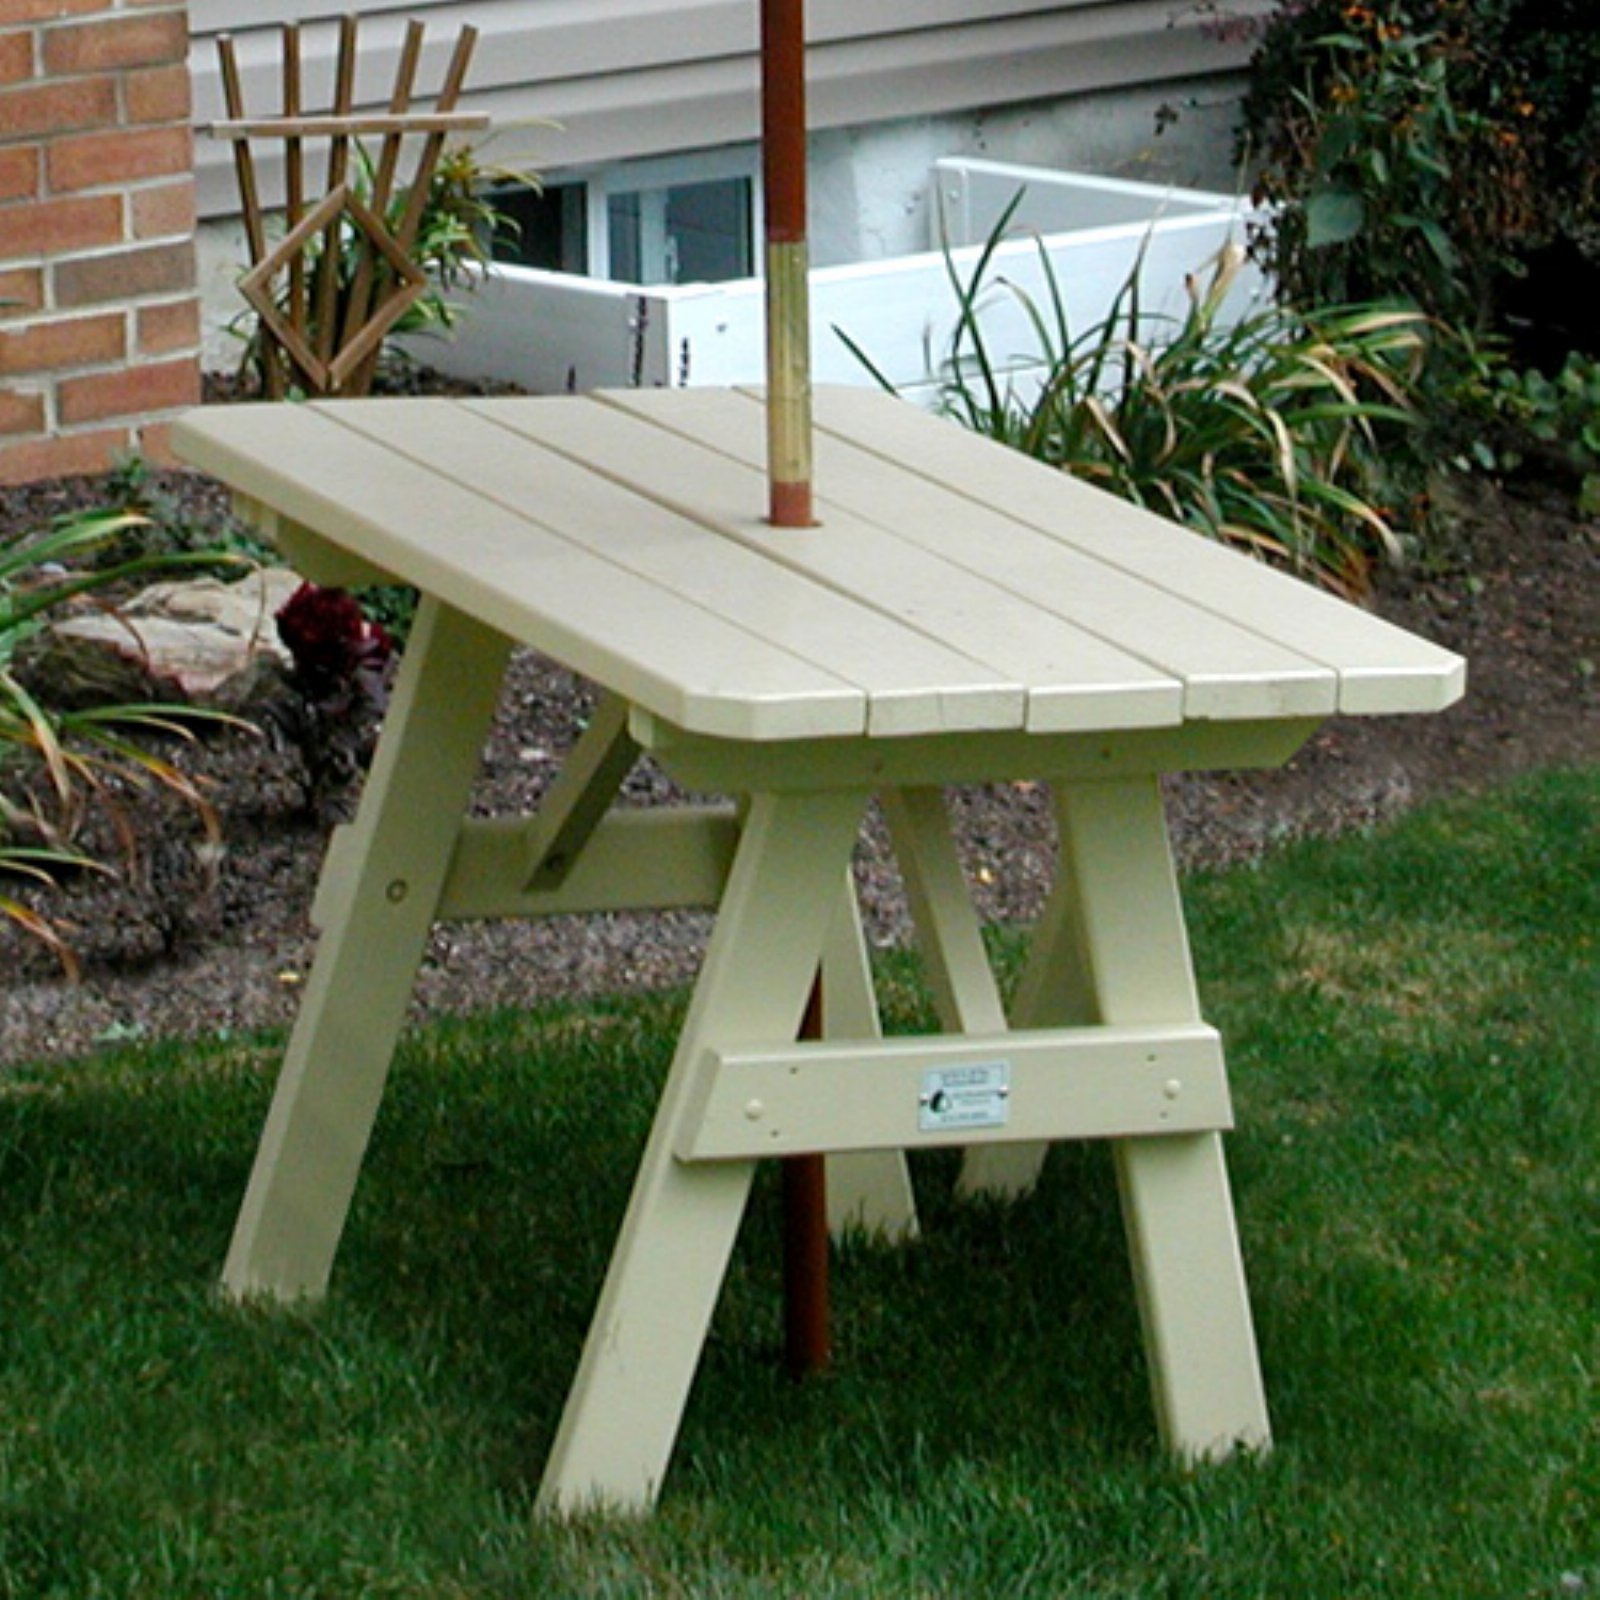 A &amp; L Furniture Yellow Pine Traditional Picnic Table - image 1 of 1